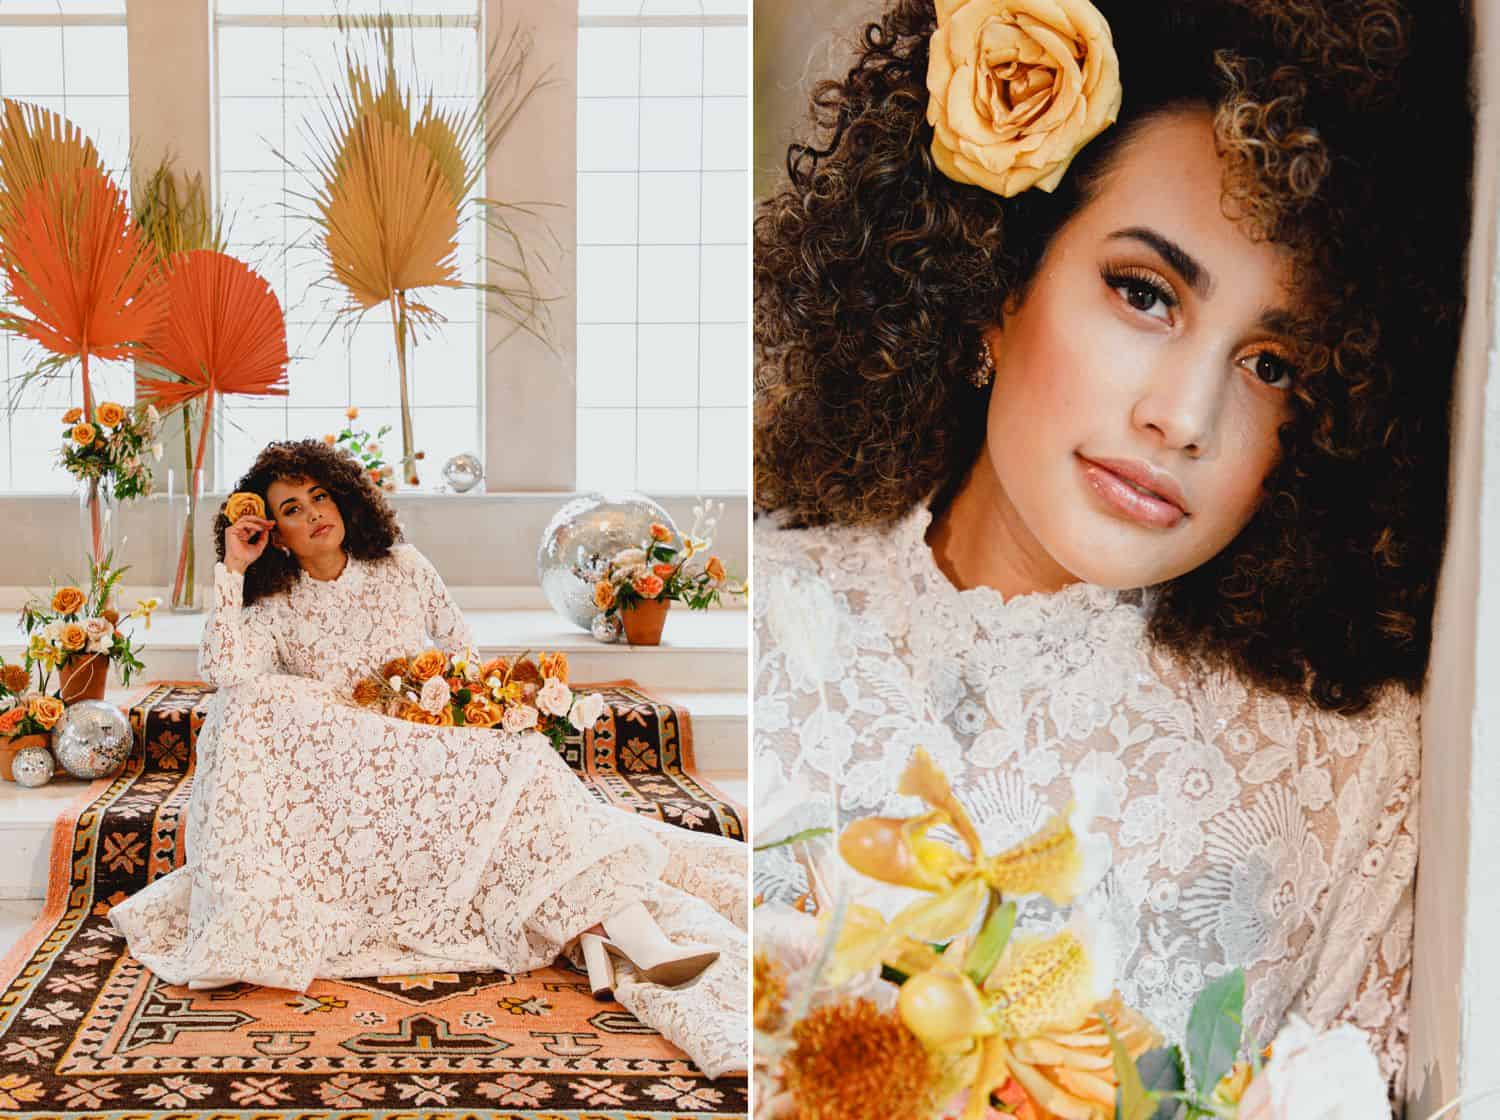 A bride in a high neck lace dress poses on a Moroccan rug in a room with huge windows decorated with orange and yellow roses.